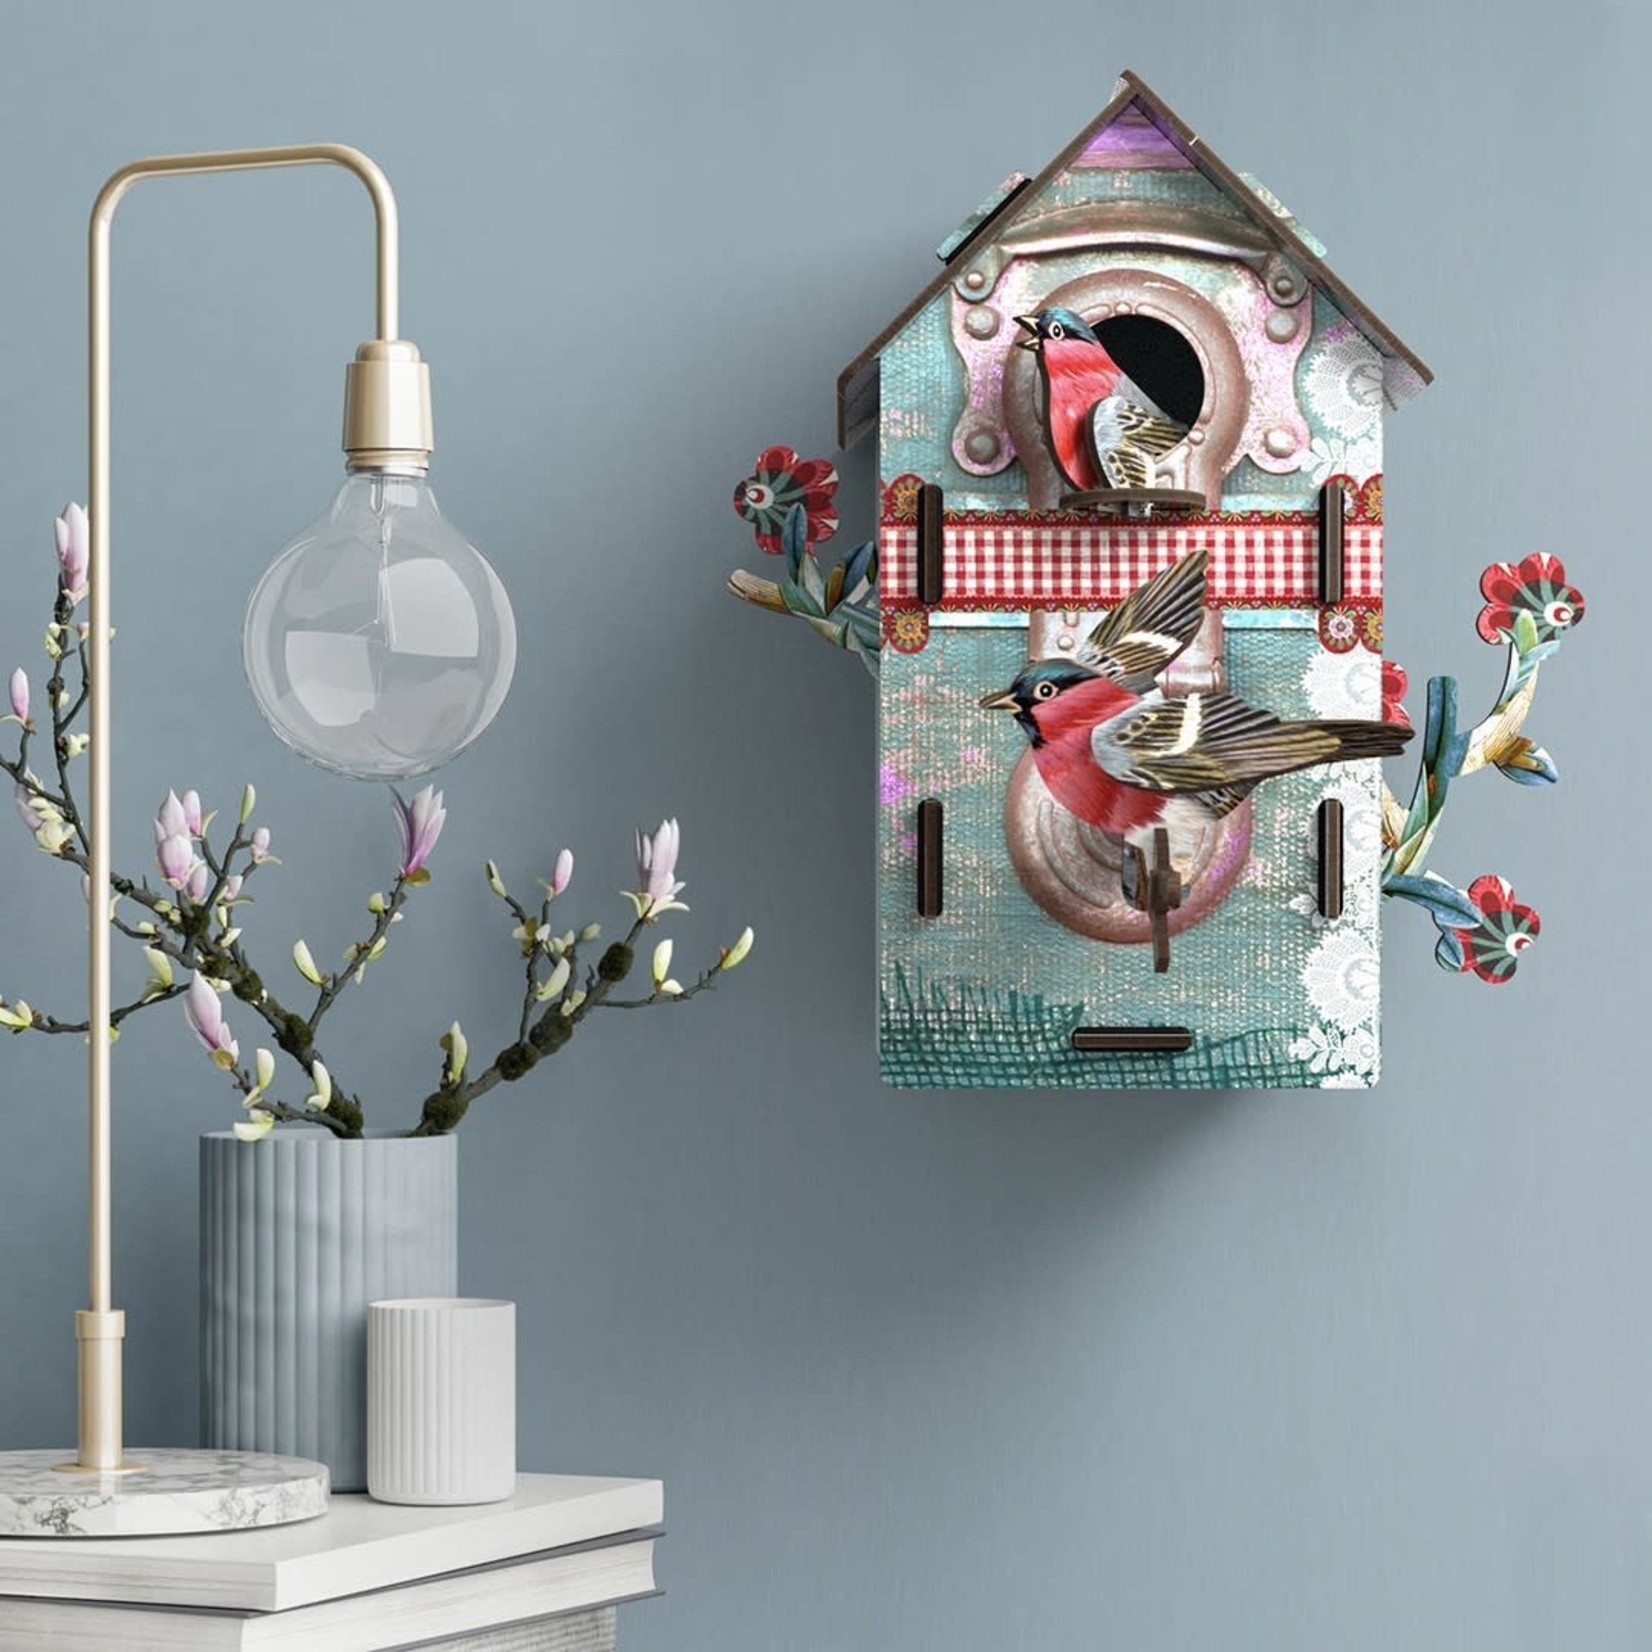 MIHO UNEXPECTED THINGS DECORATIVE BIRDHOUSE (2 FLOORS) - PLAYMATES